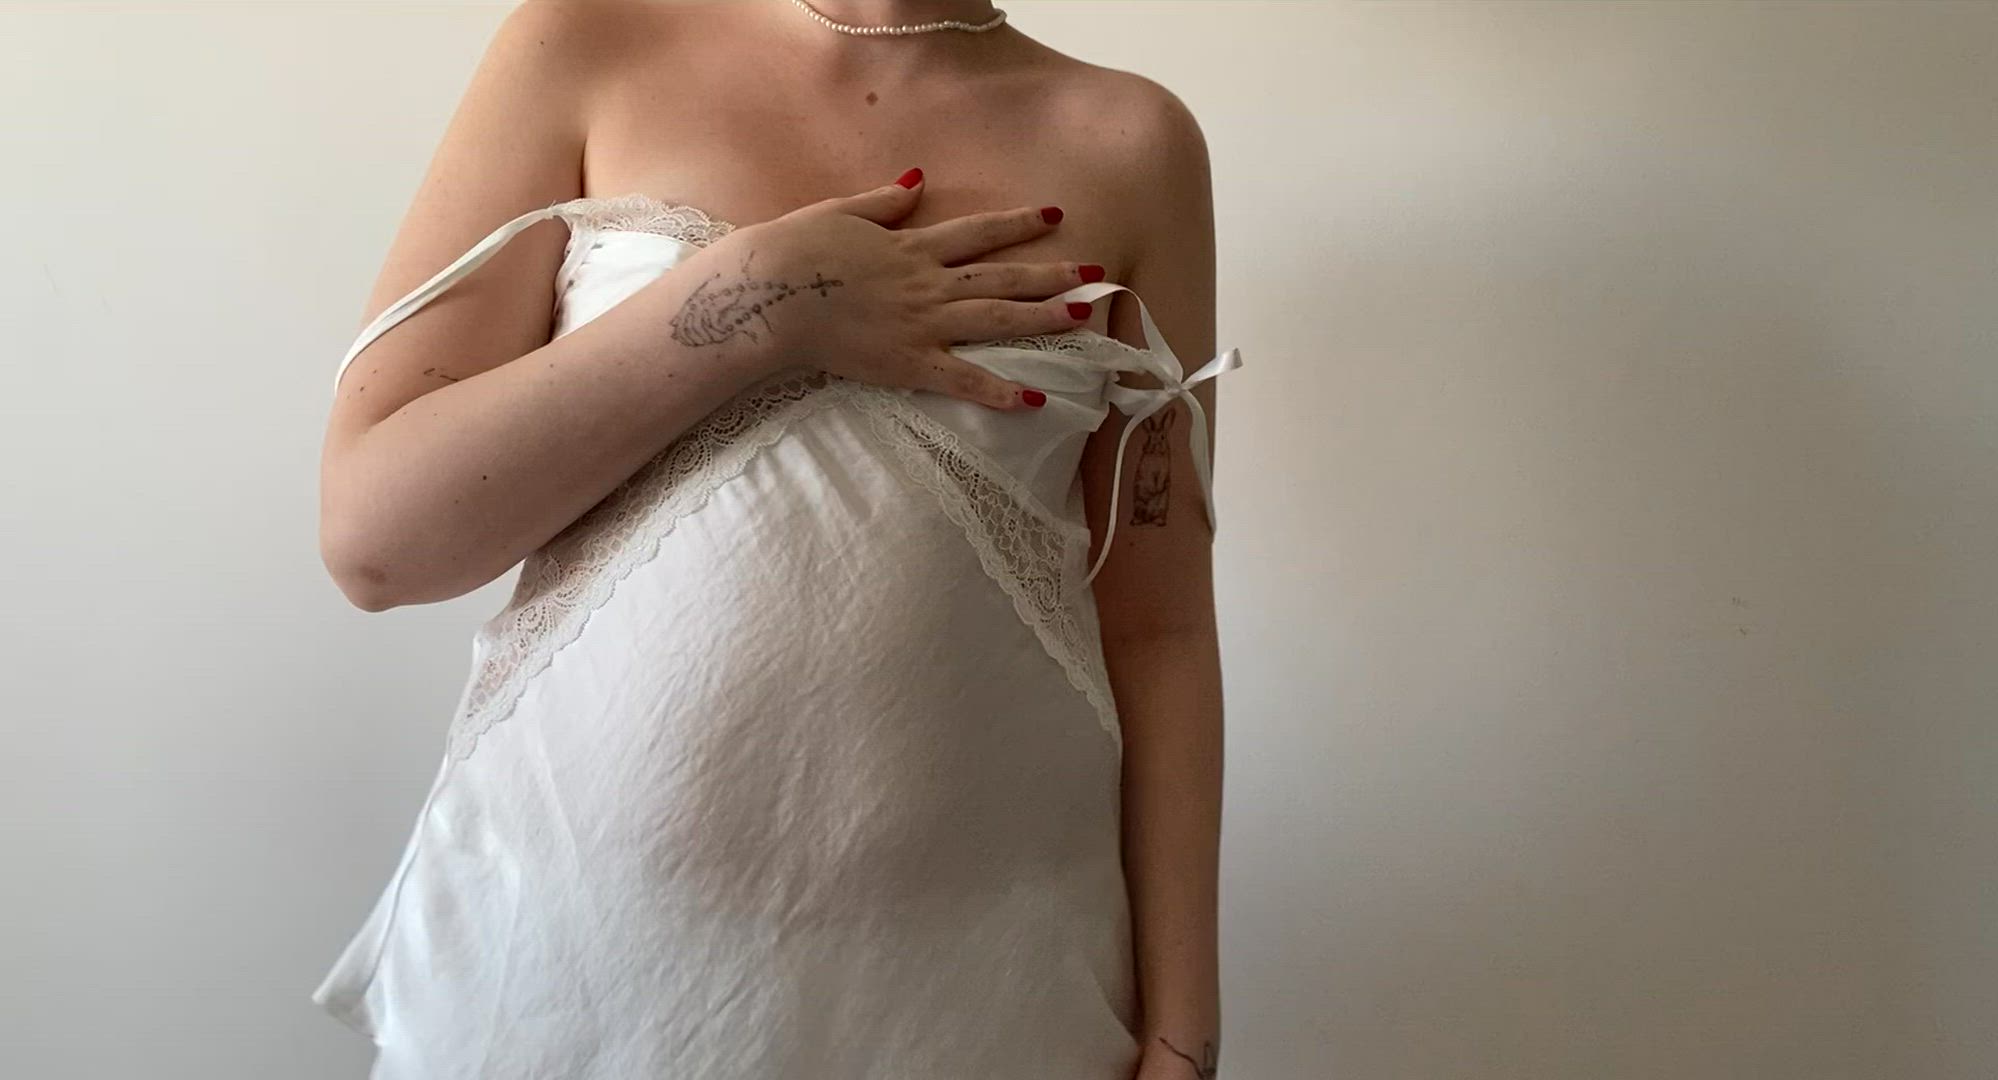 Homemade porn video with onlyfans model https://onlyfans.com/loverelise <strong>@loverelise</strong>